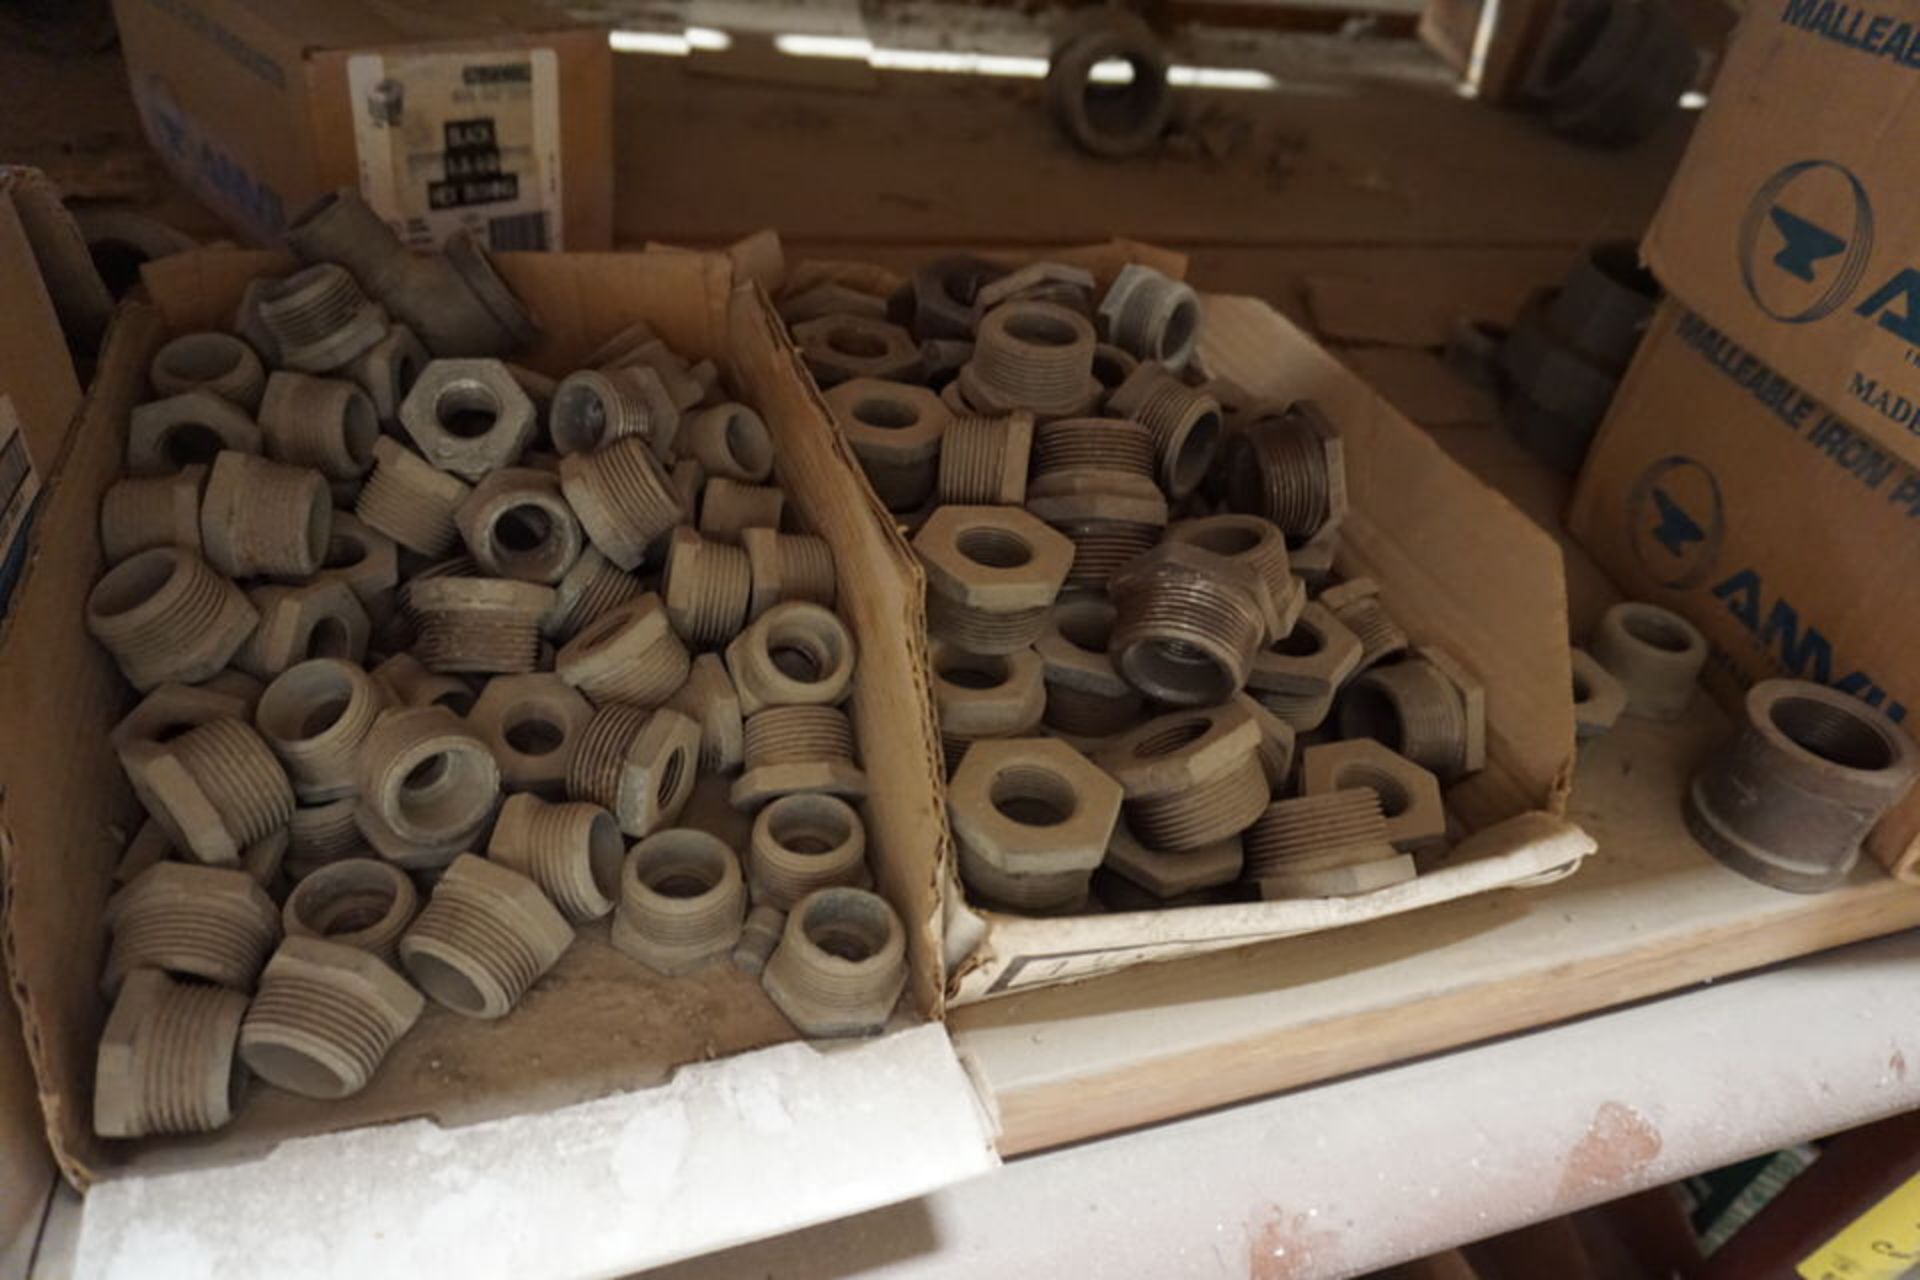 CONT OF SHELF: ASSORT SIZE PIPE NIPPLES, L'S, BELL RODS, REDUCERS, RANGE 1/8" TO 3" APPROX 400 PCS - Image 16 of 16